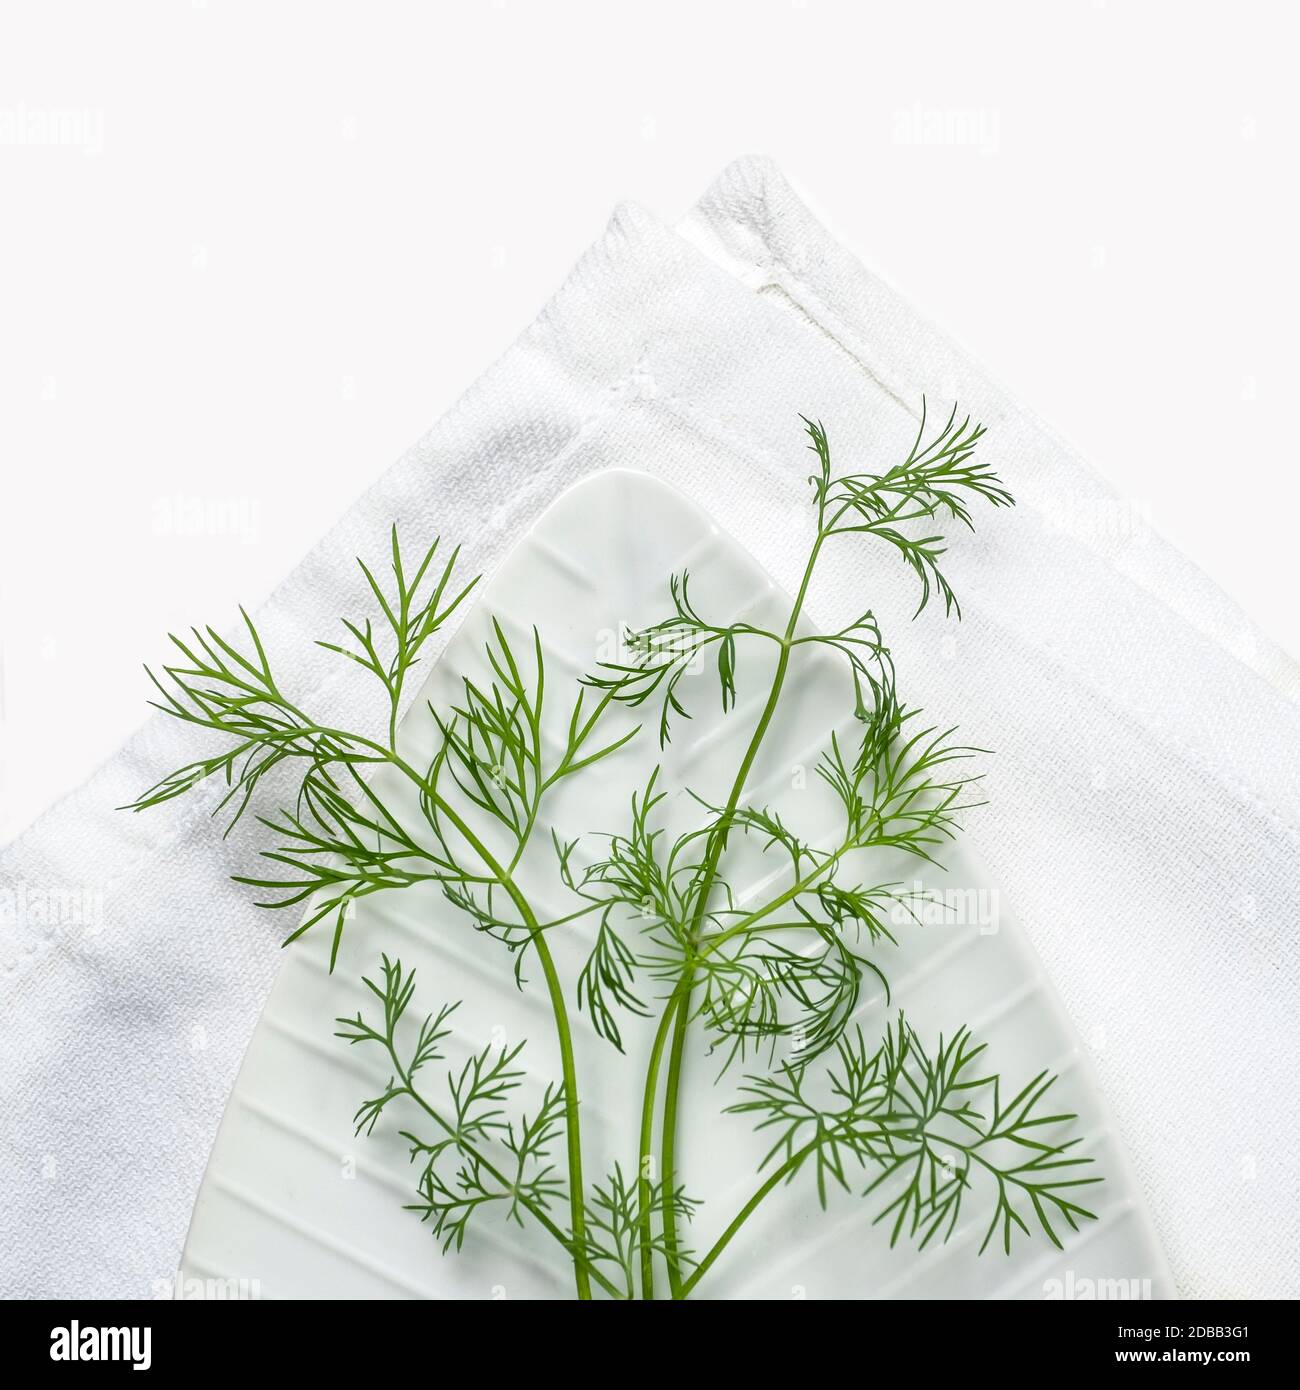 Dill on white background Stock Photo